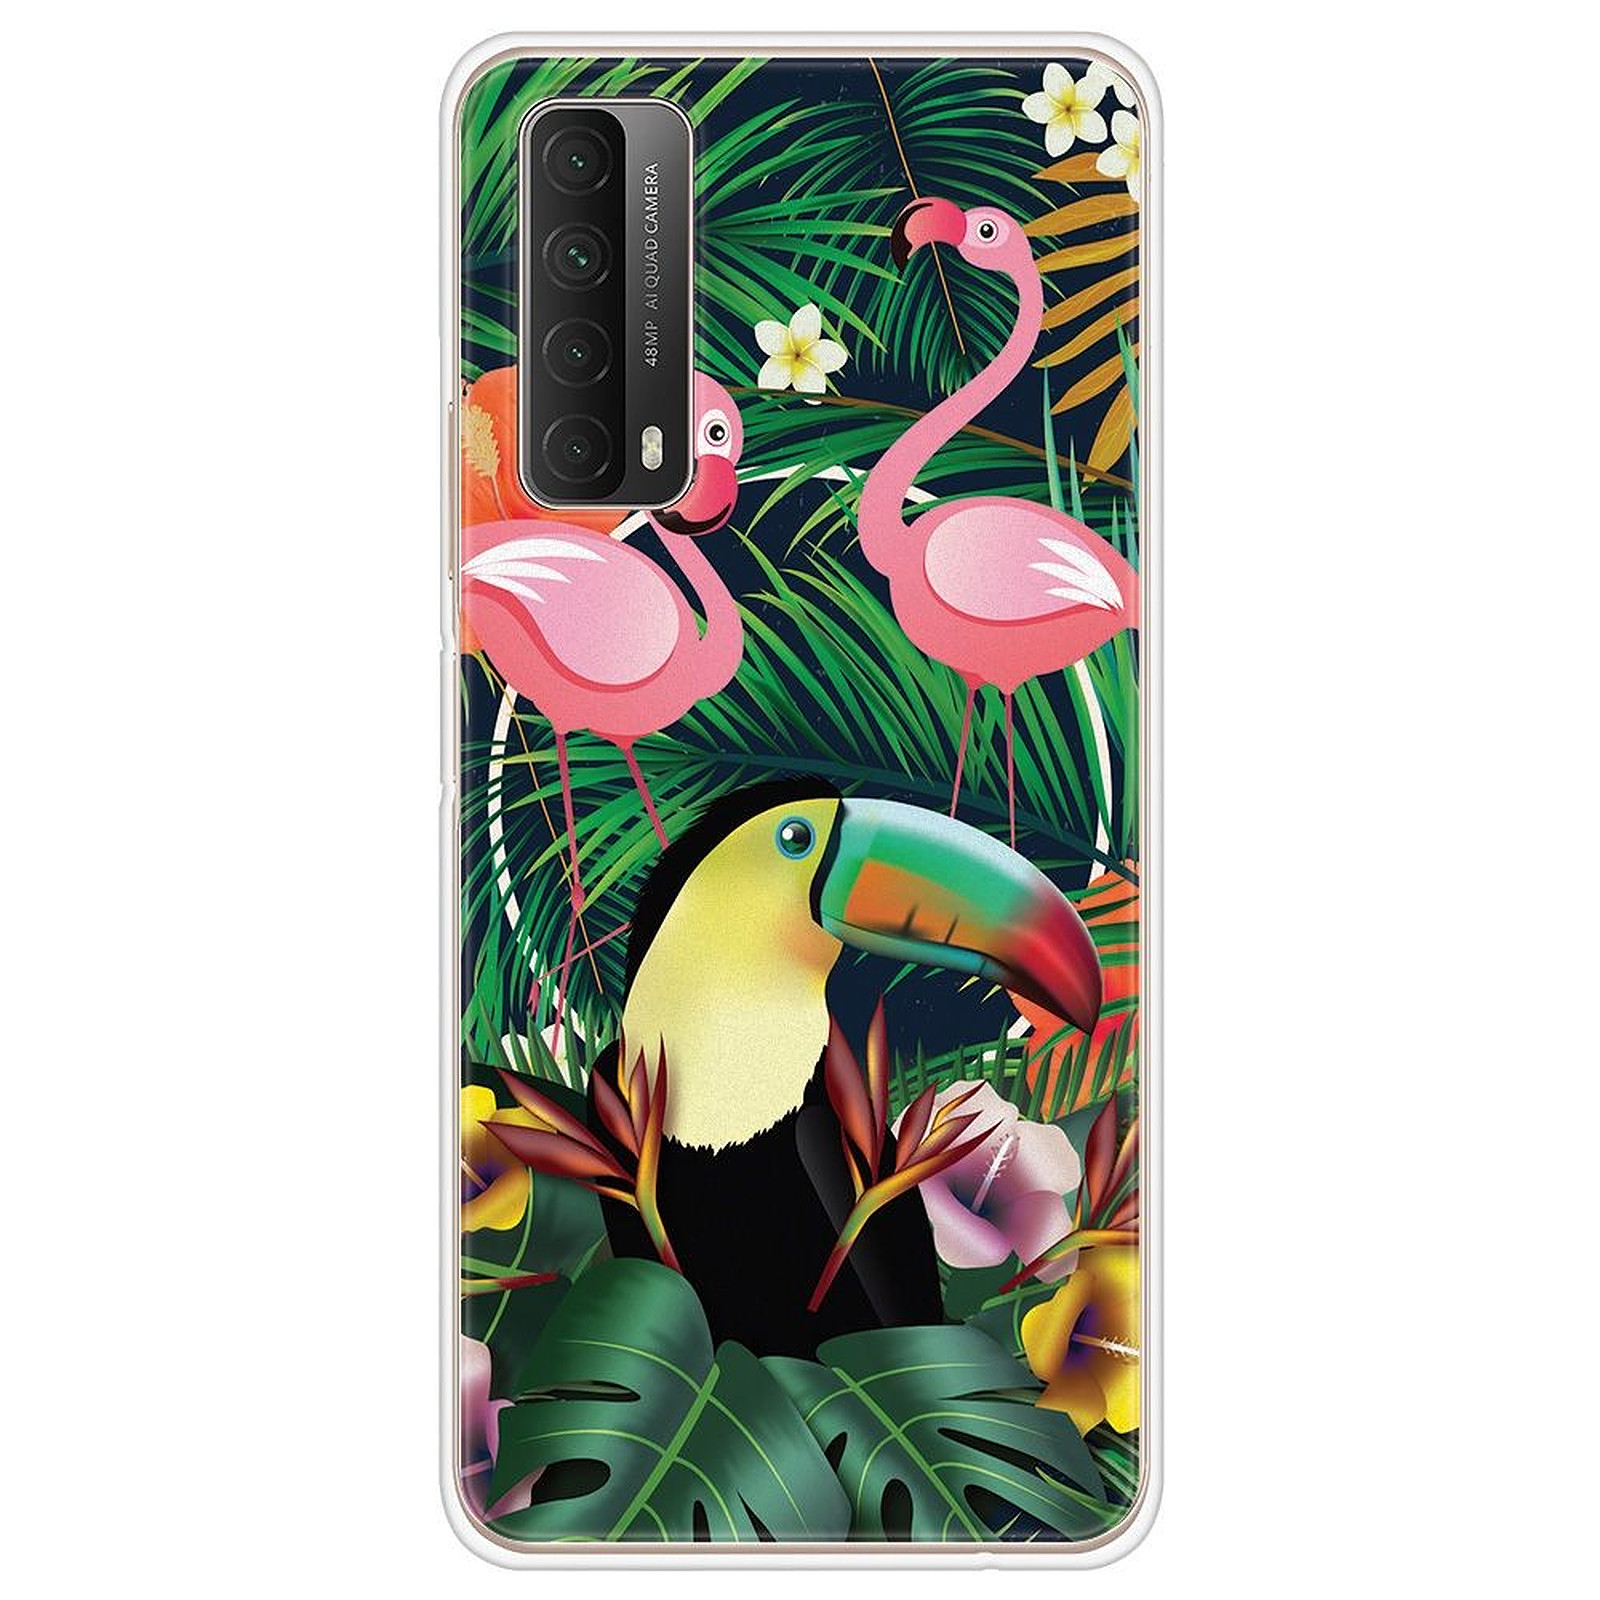 1001 Coques Coque silicone gel Huawei P Smart 2021 motif Tropical Toucan - Coque telephone 1001Coques